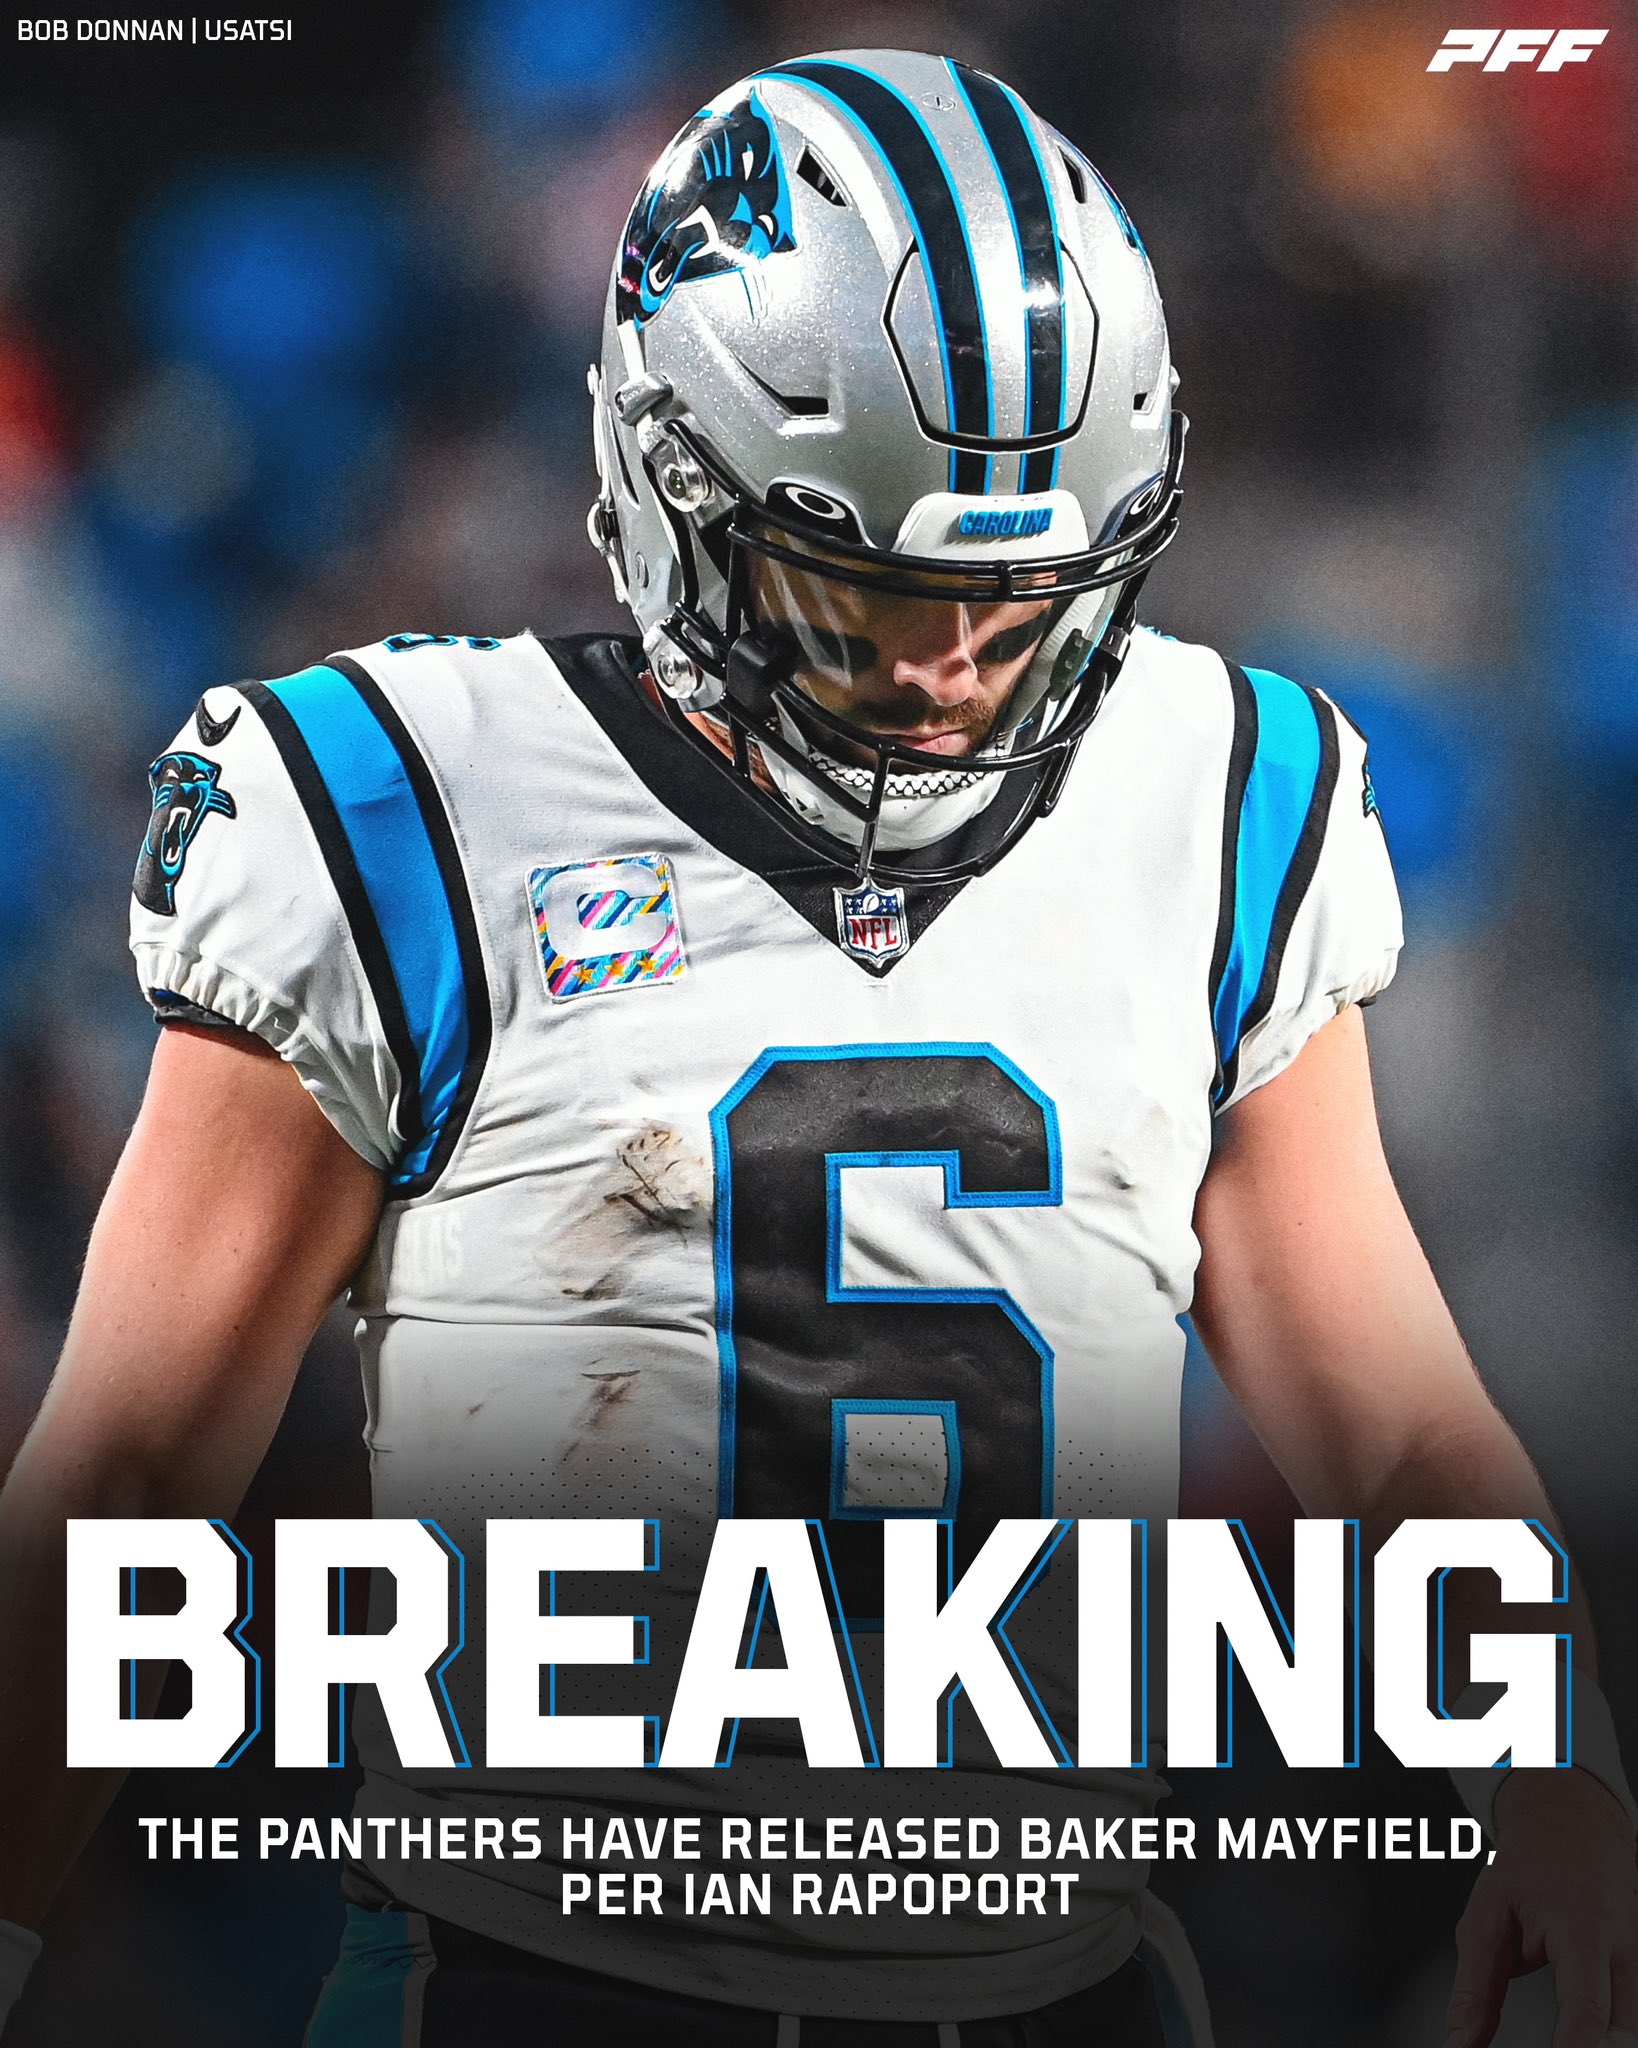 PFF on X: 'The Panthers are expected to release Baker Mayfield